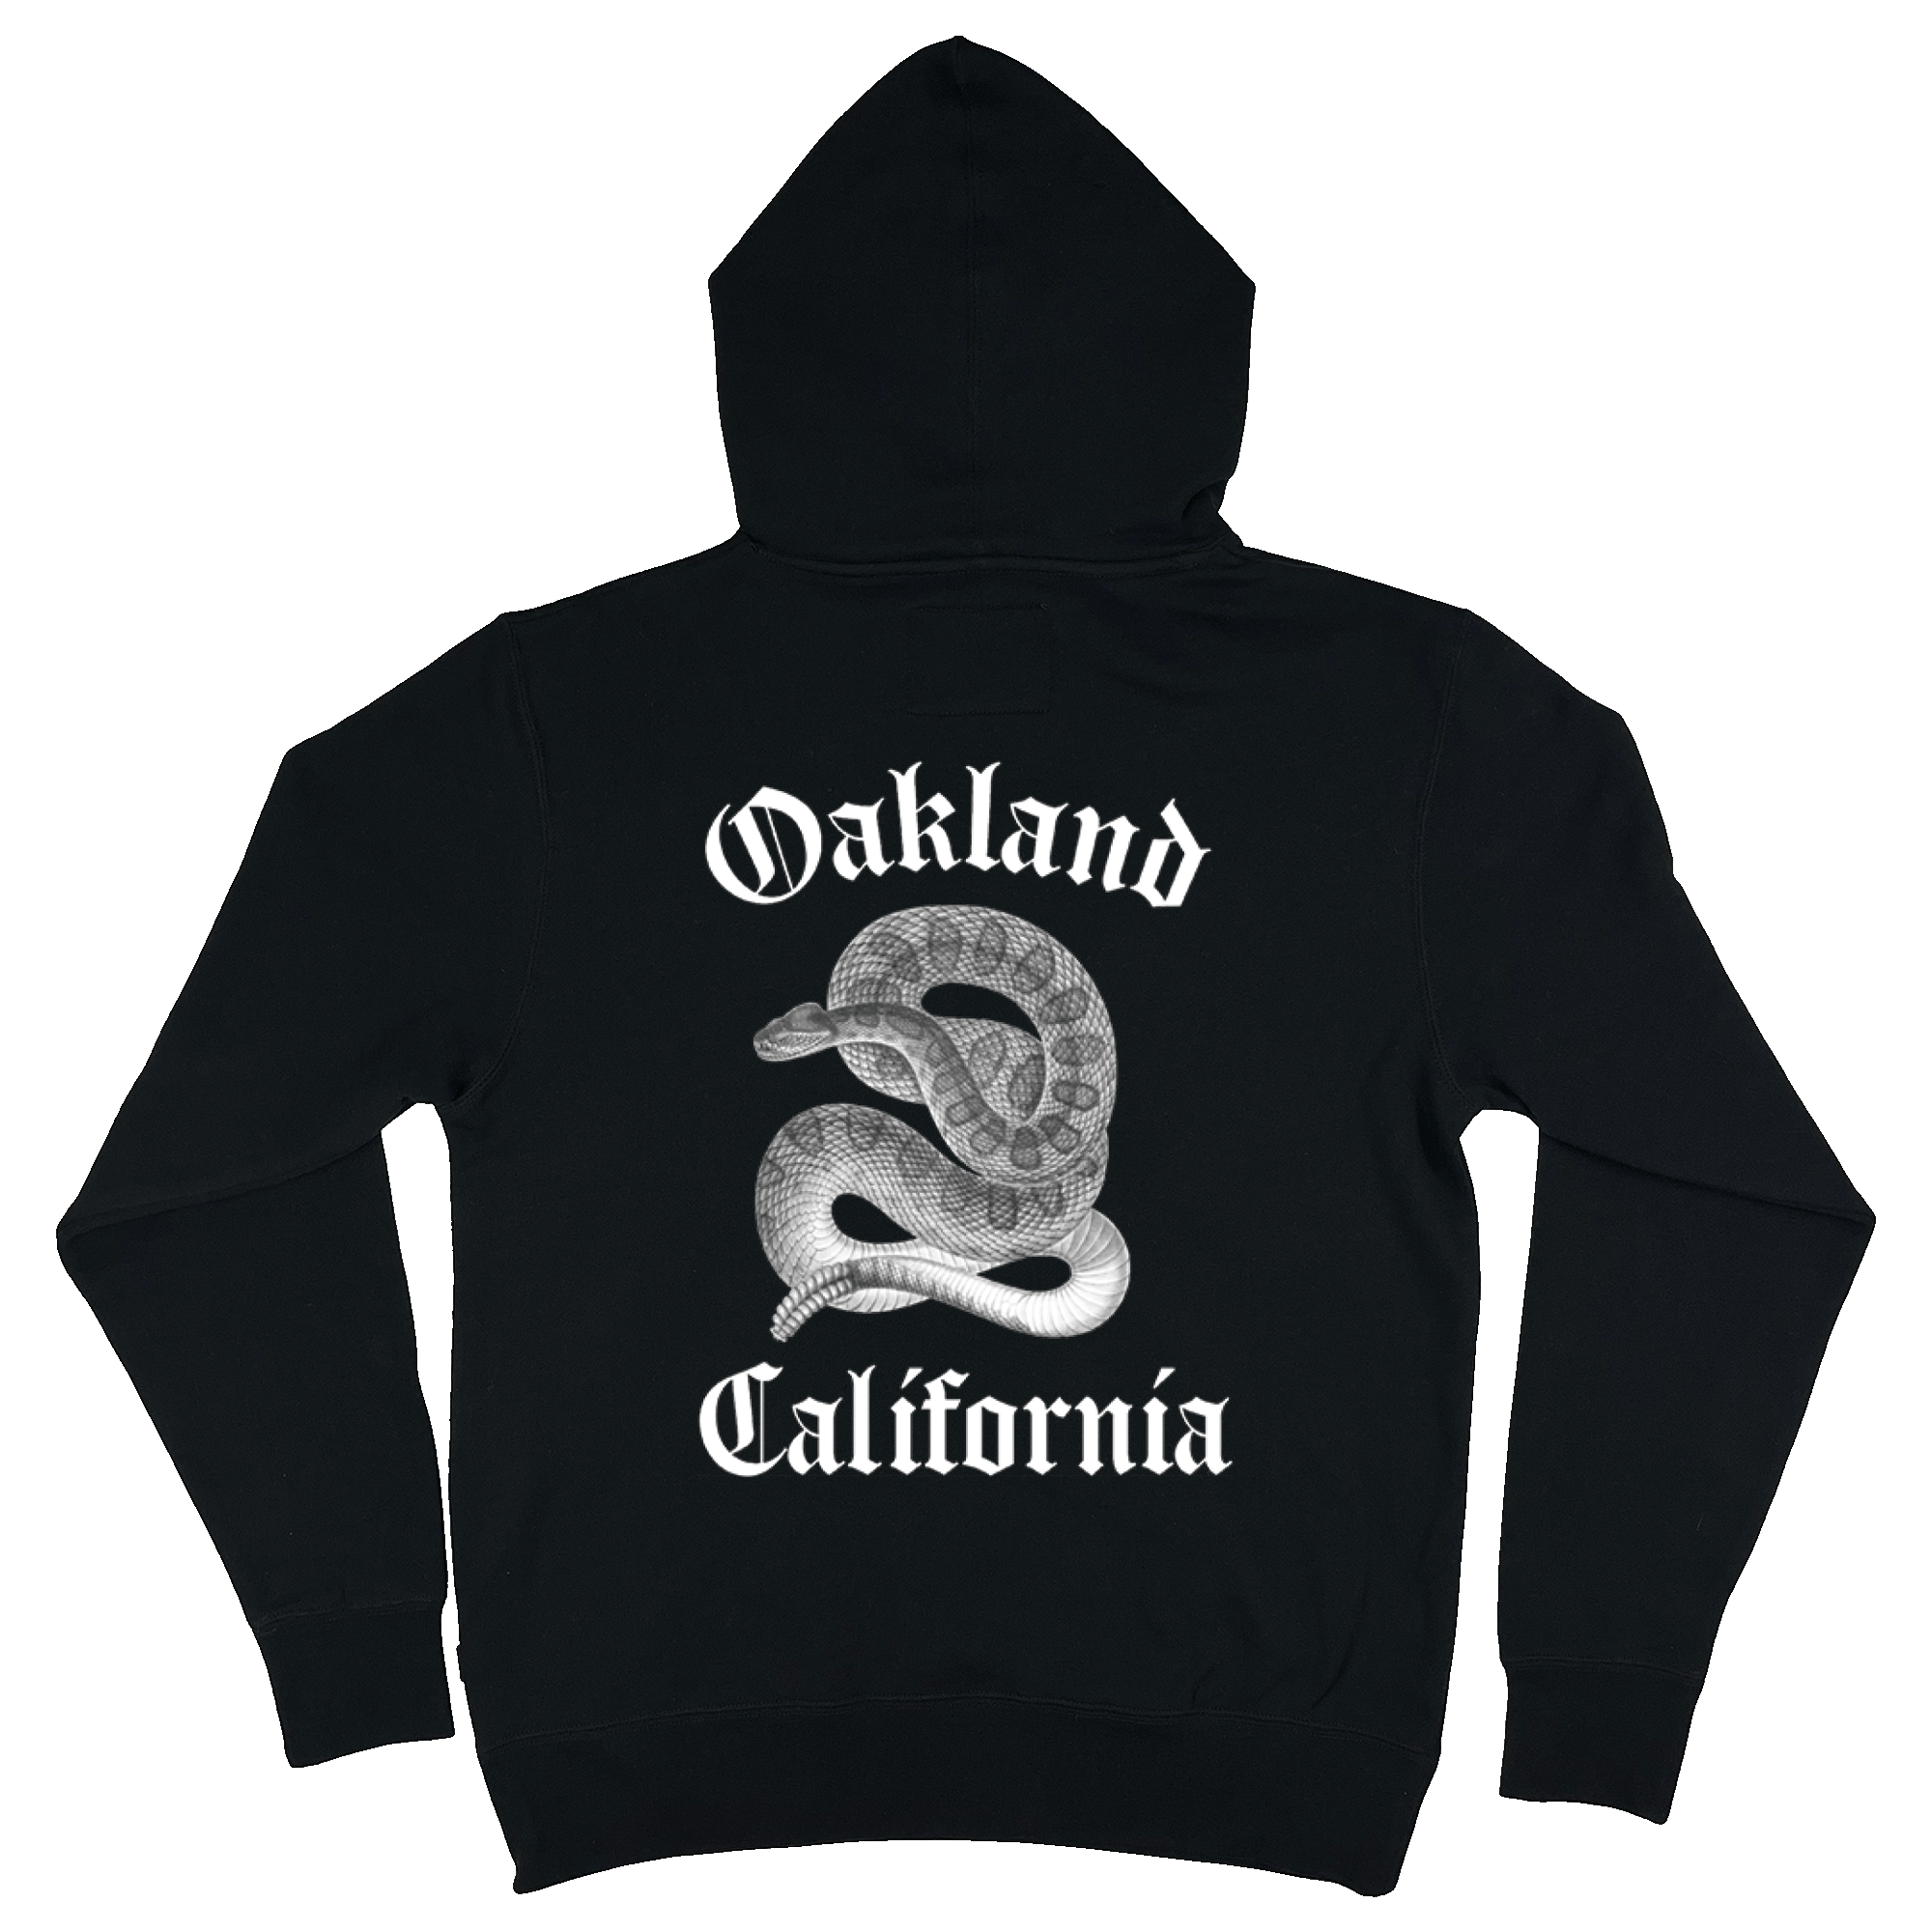 Back view of black pullover hoodie with Oakland California text and snake.